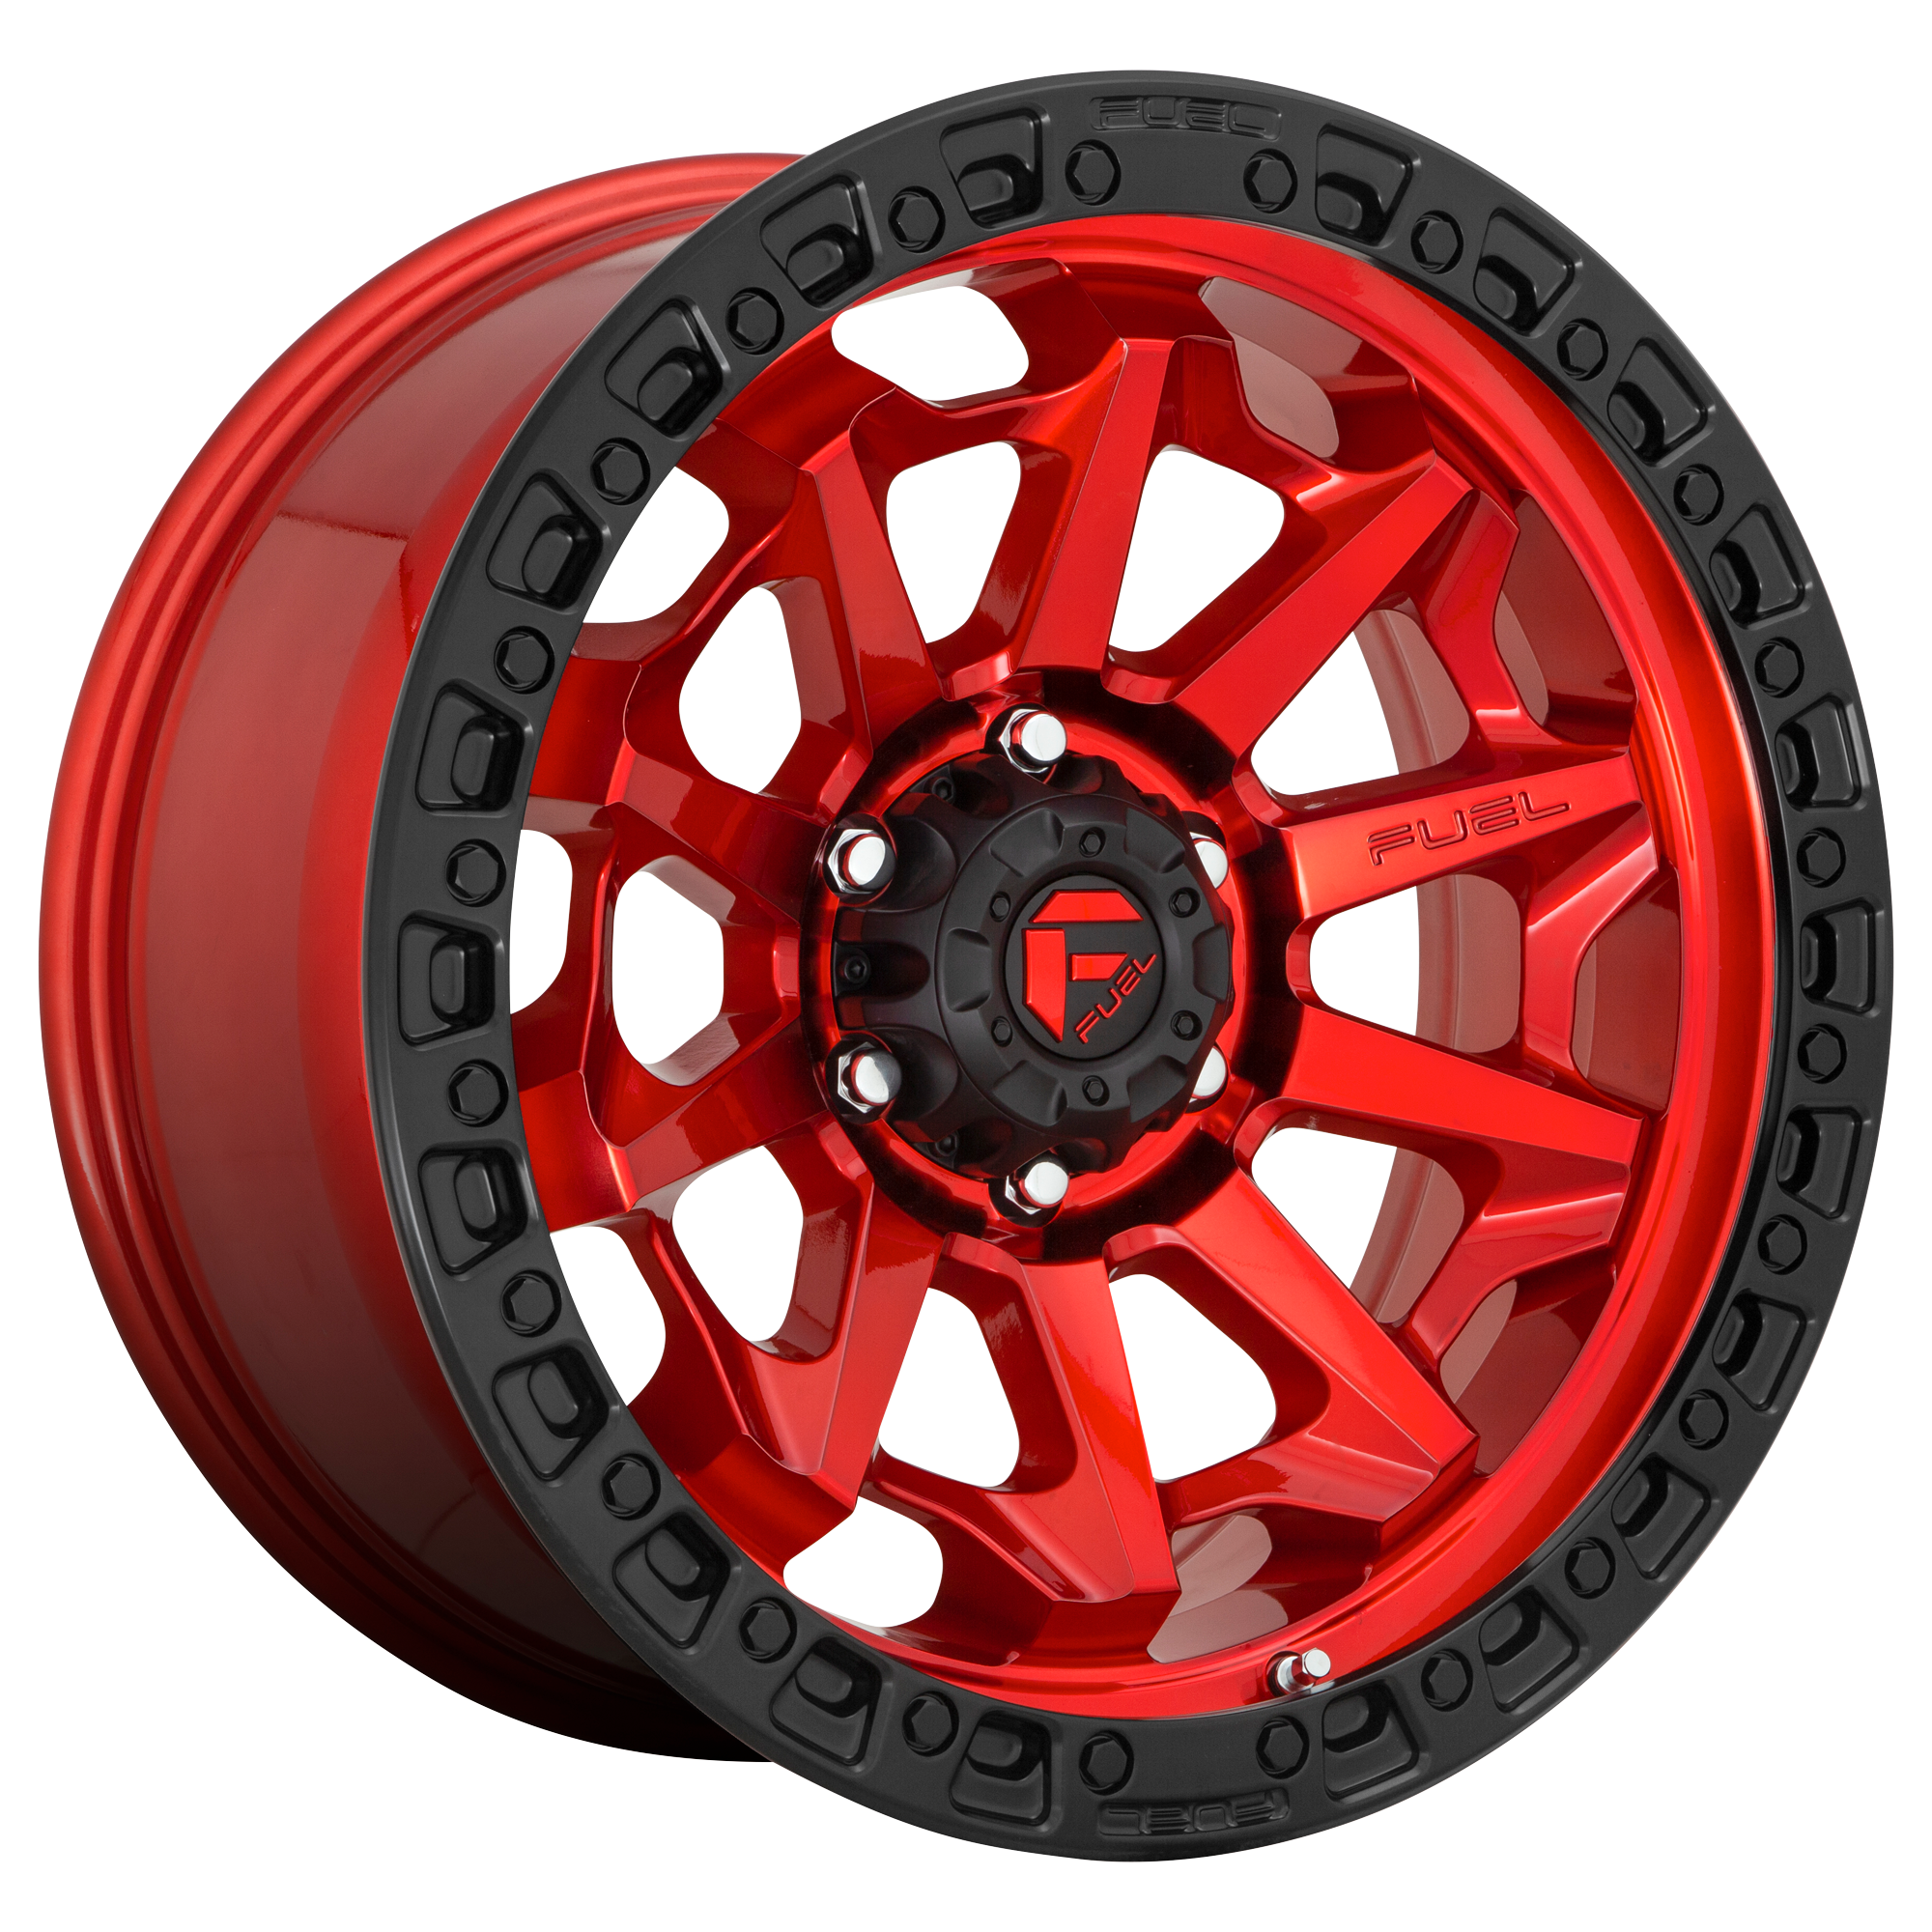 COVERT 20x9 5x127.00 CANDY RED BLACK BEAD RING (20 mm) - Tires and Engine Performance